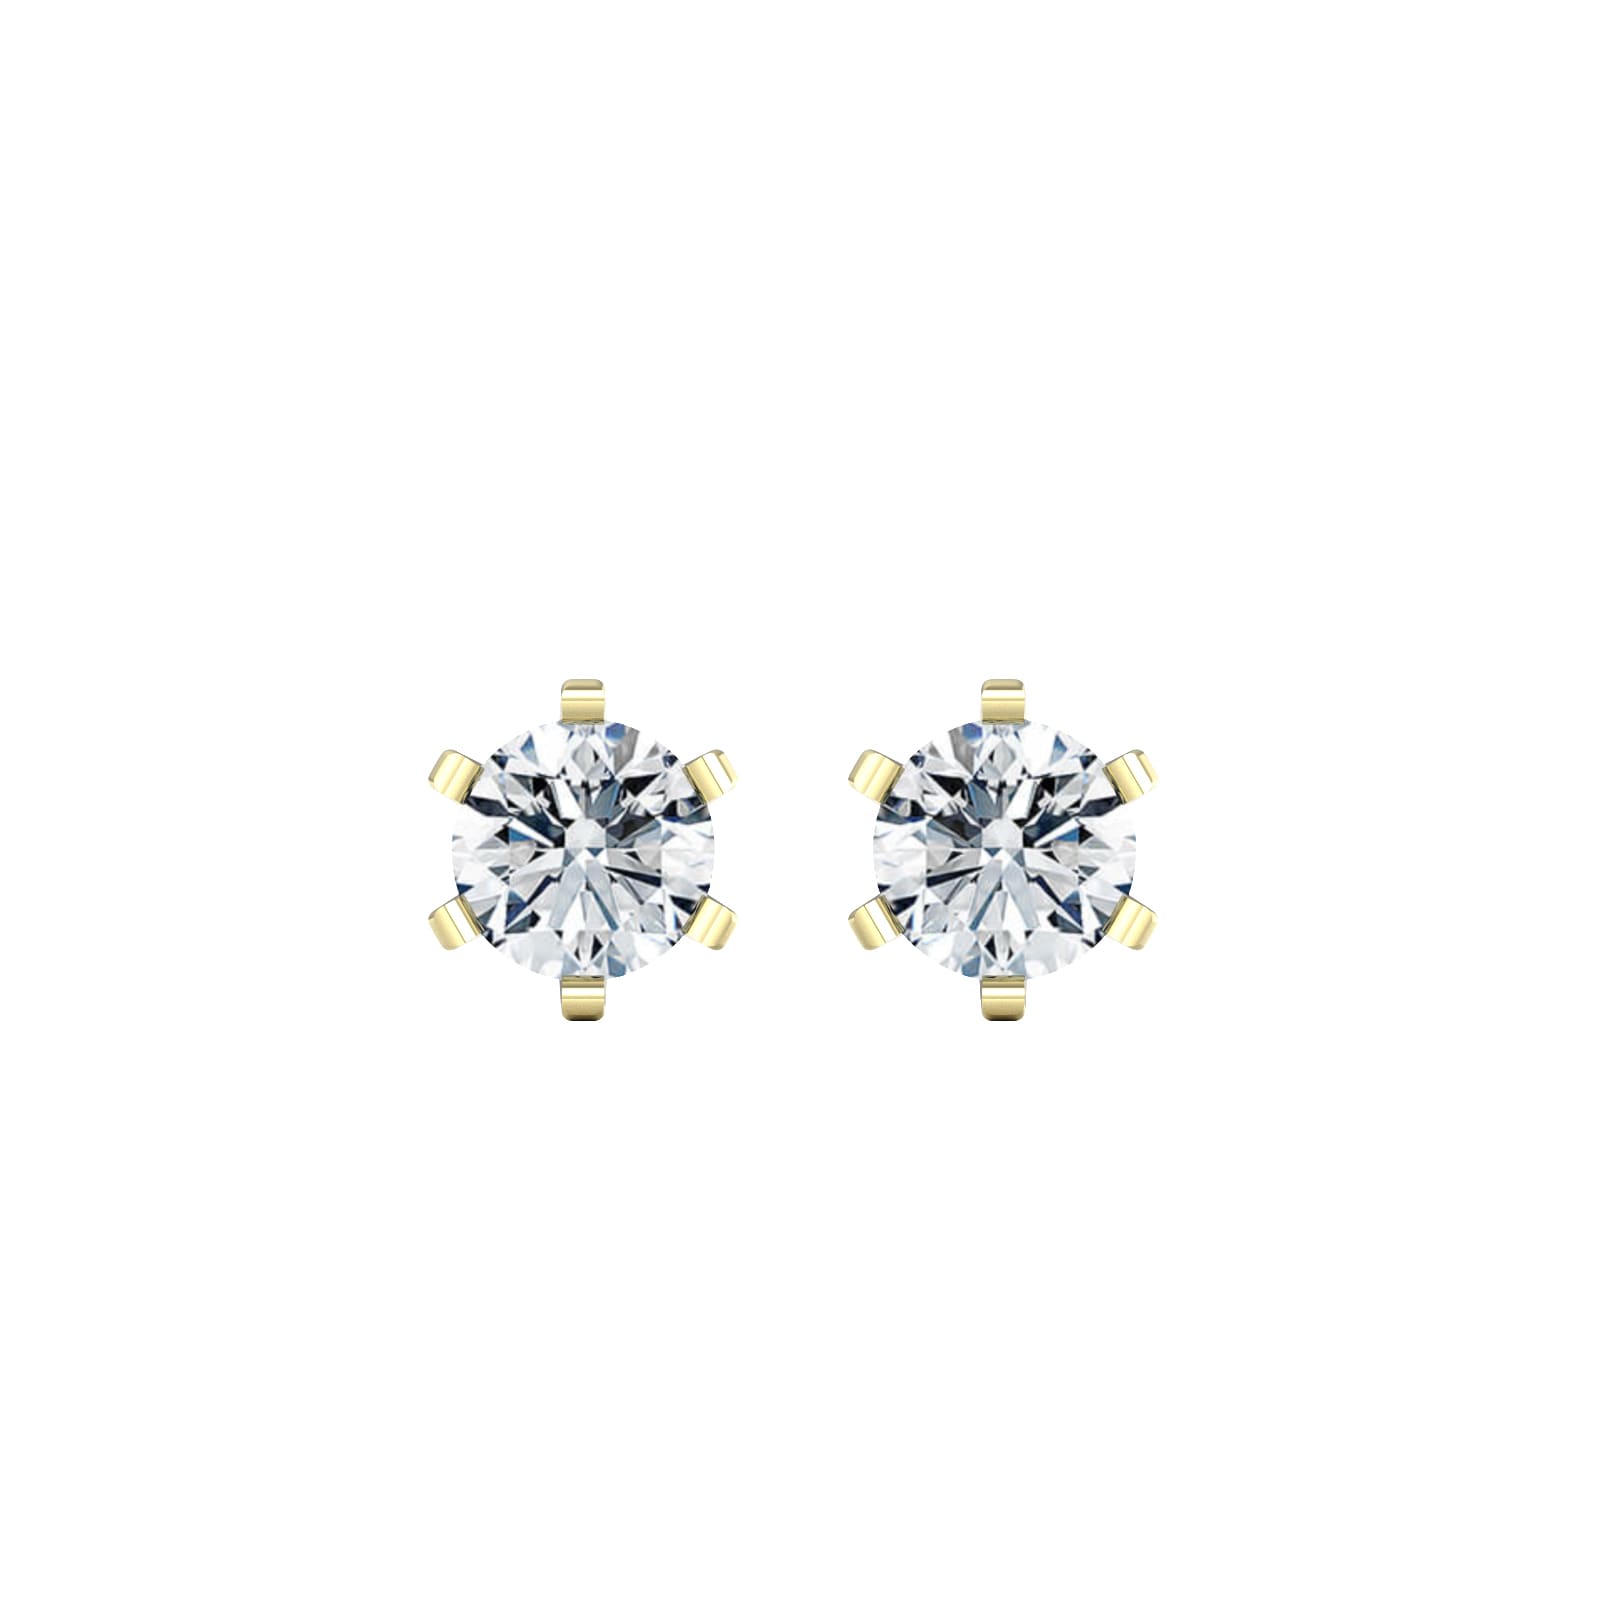 9ct Yellow Gold 0.60cttw Solitaire Diamond Stud Earrings